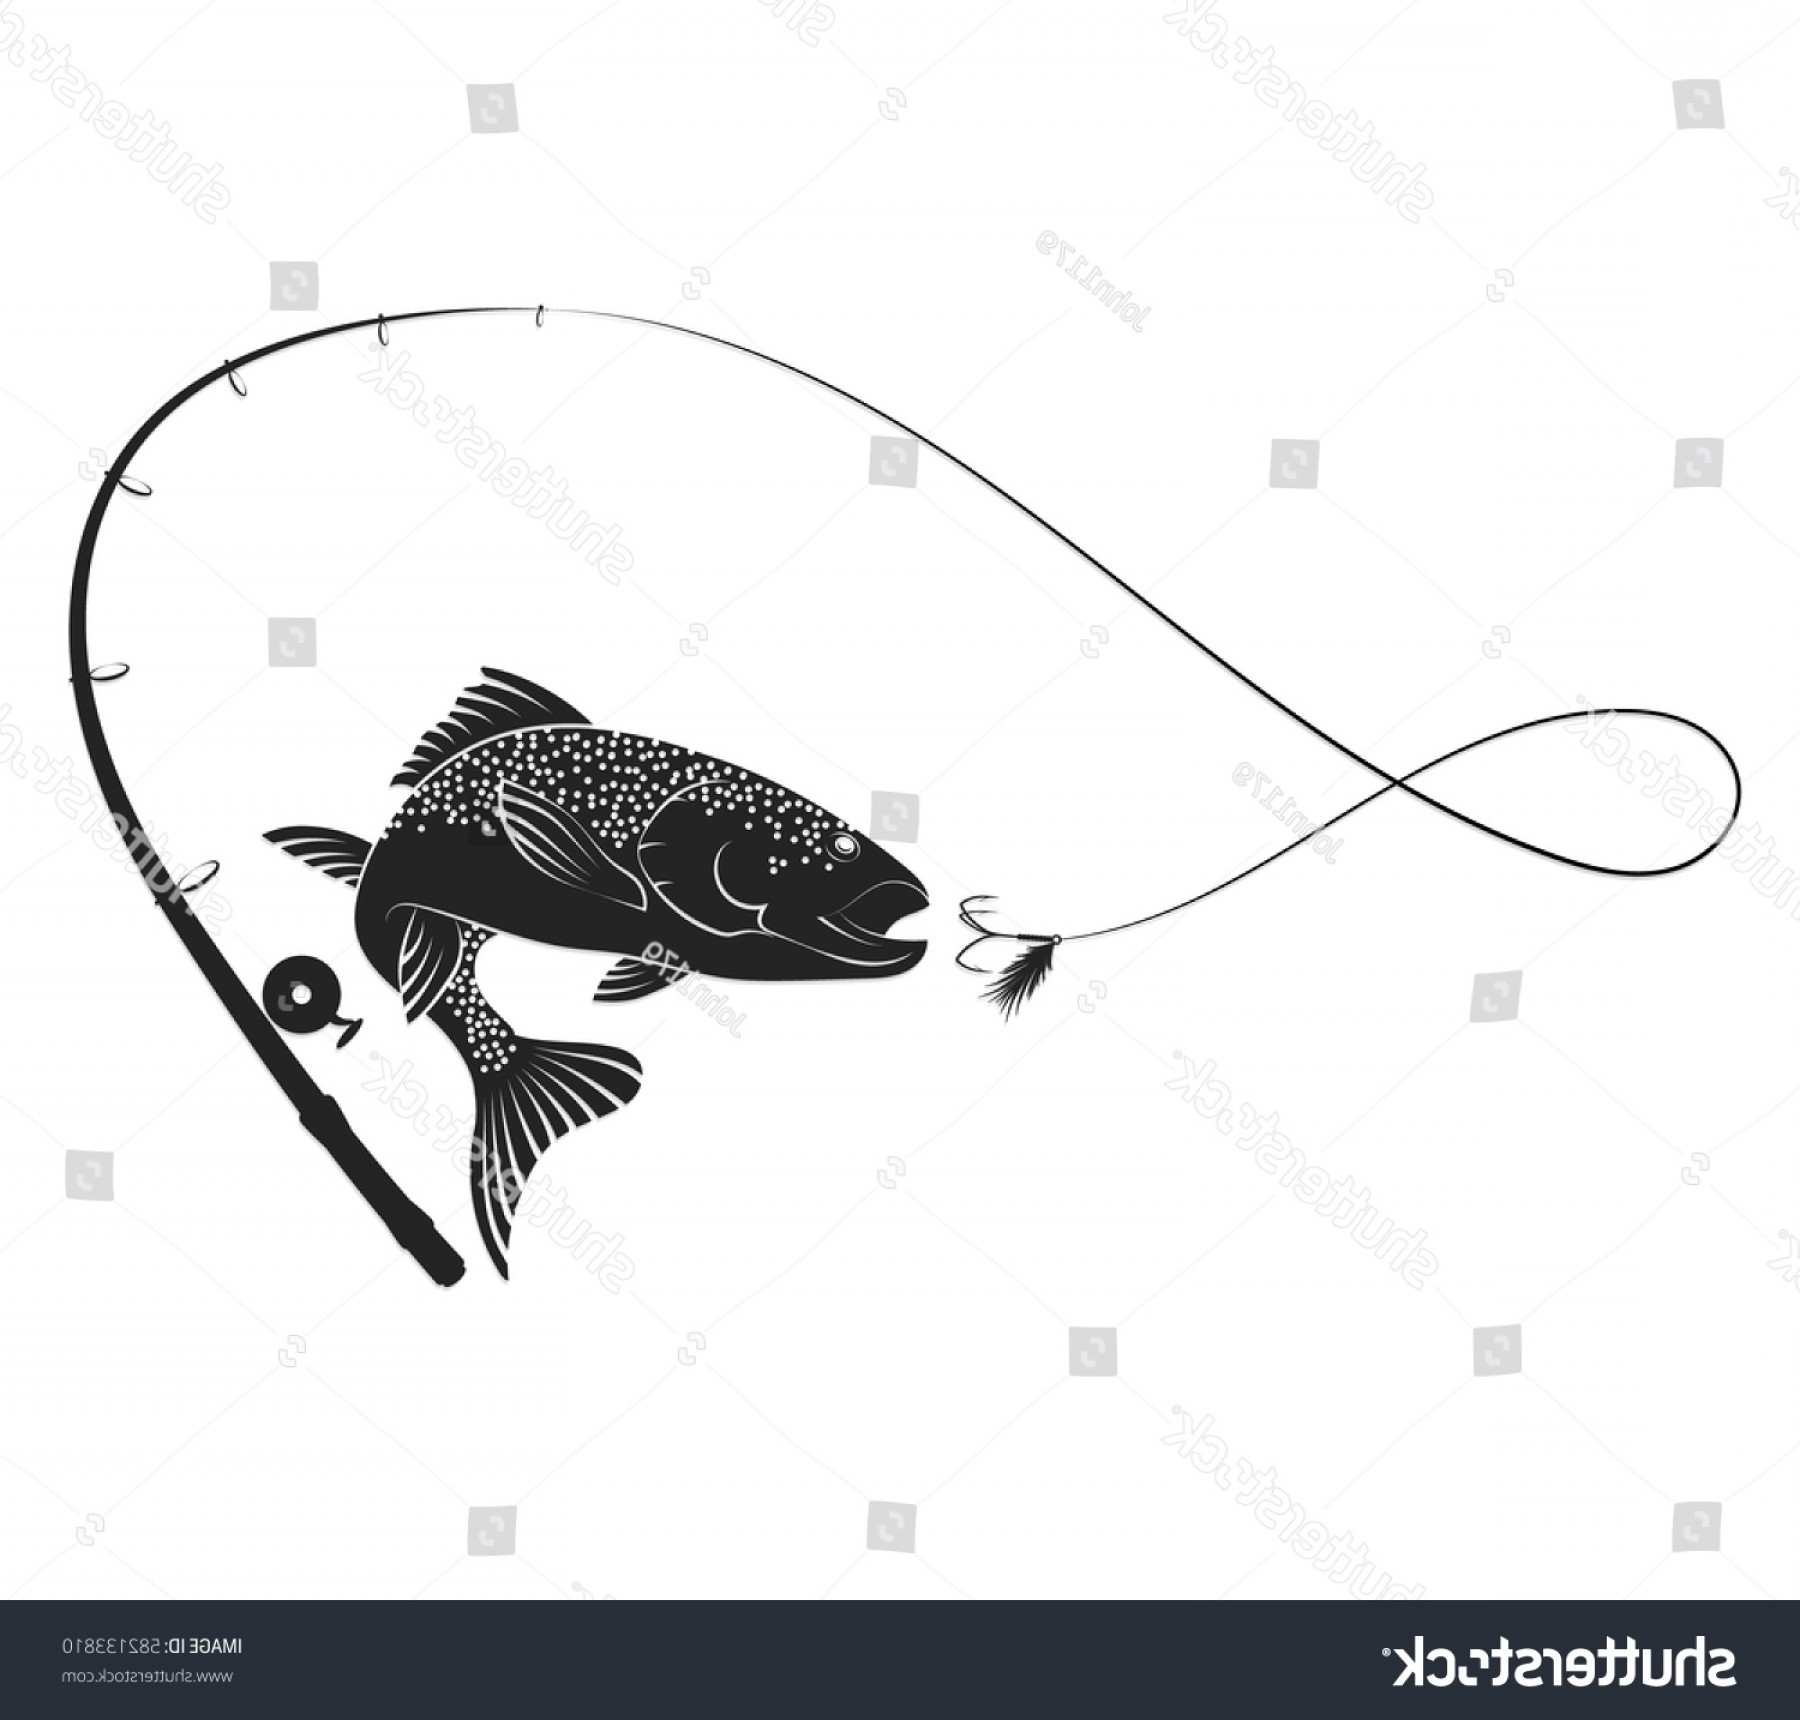 Download Fly Fishing Silhouette Vector at Vectorified.com | Collection of Fly Fishing Silhouette Vector ...